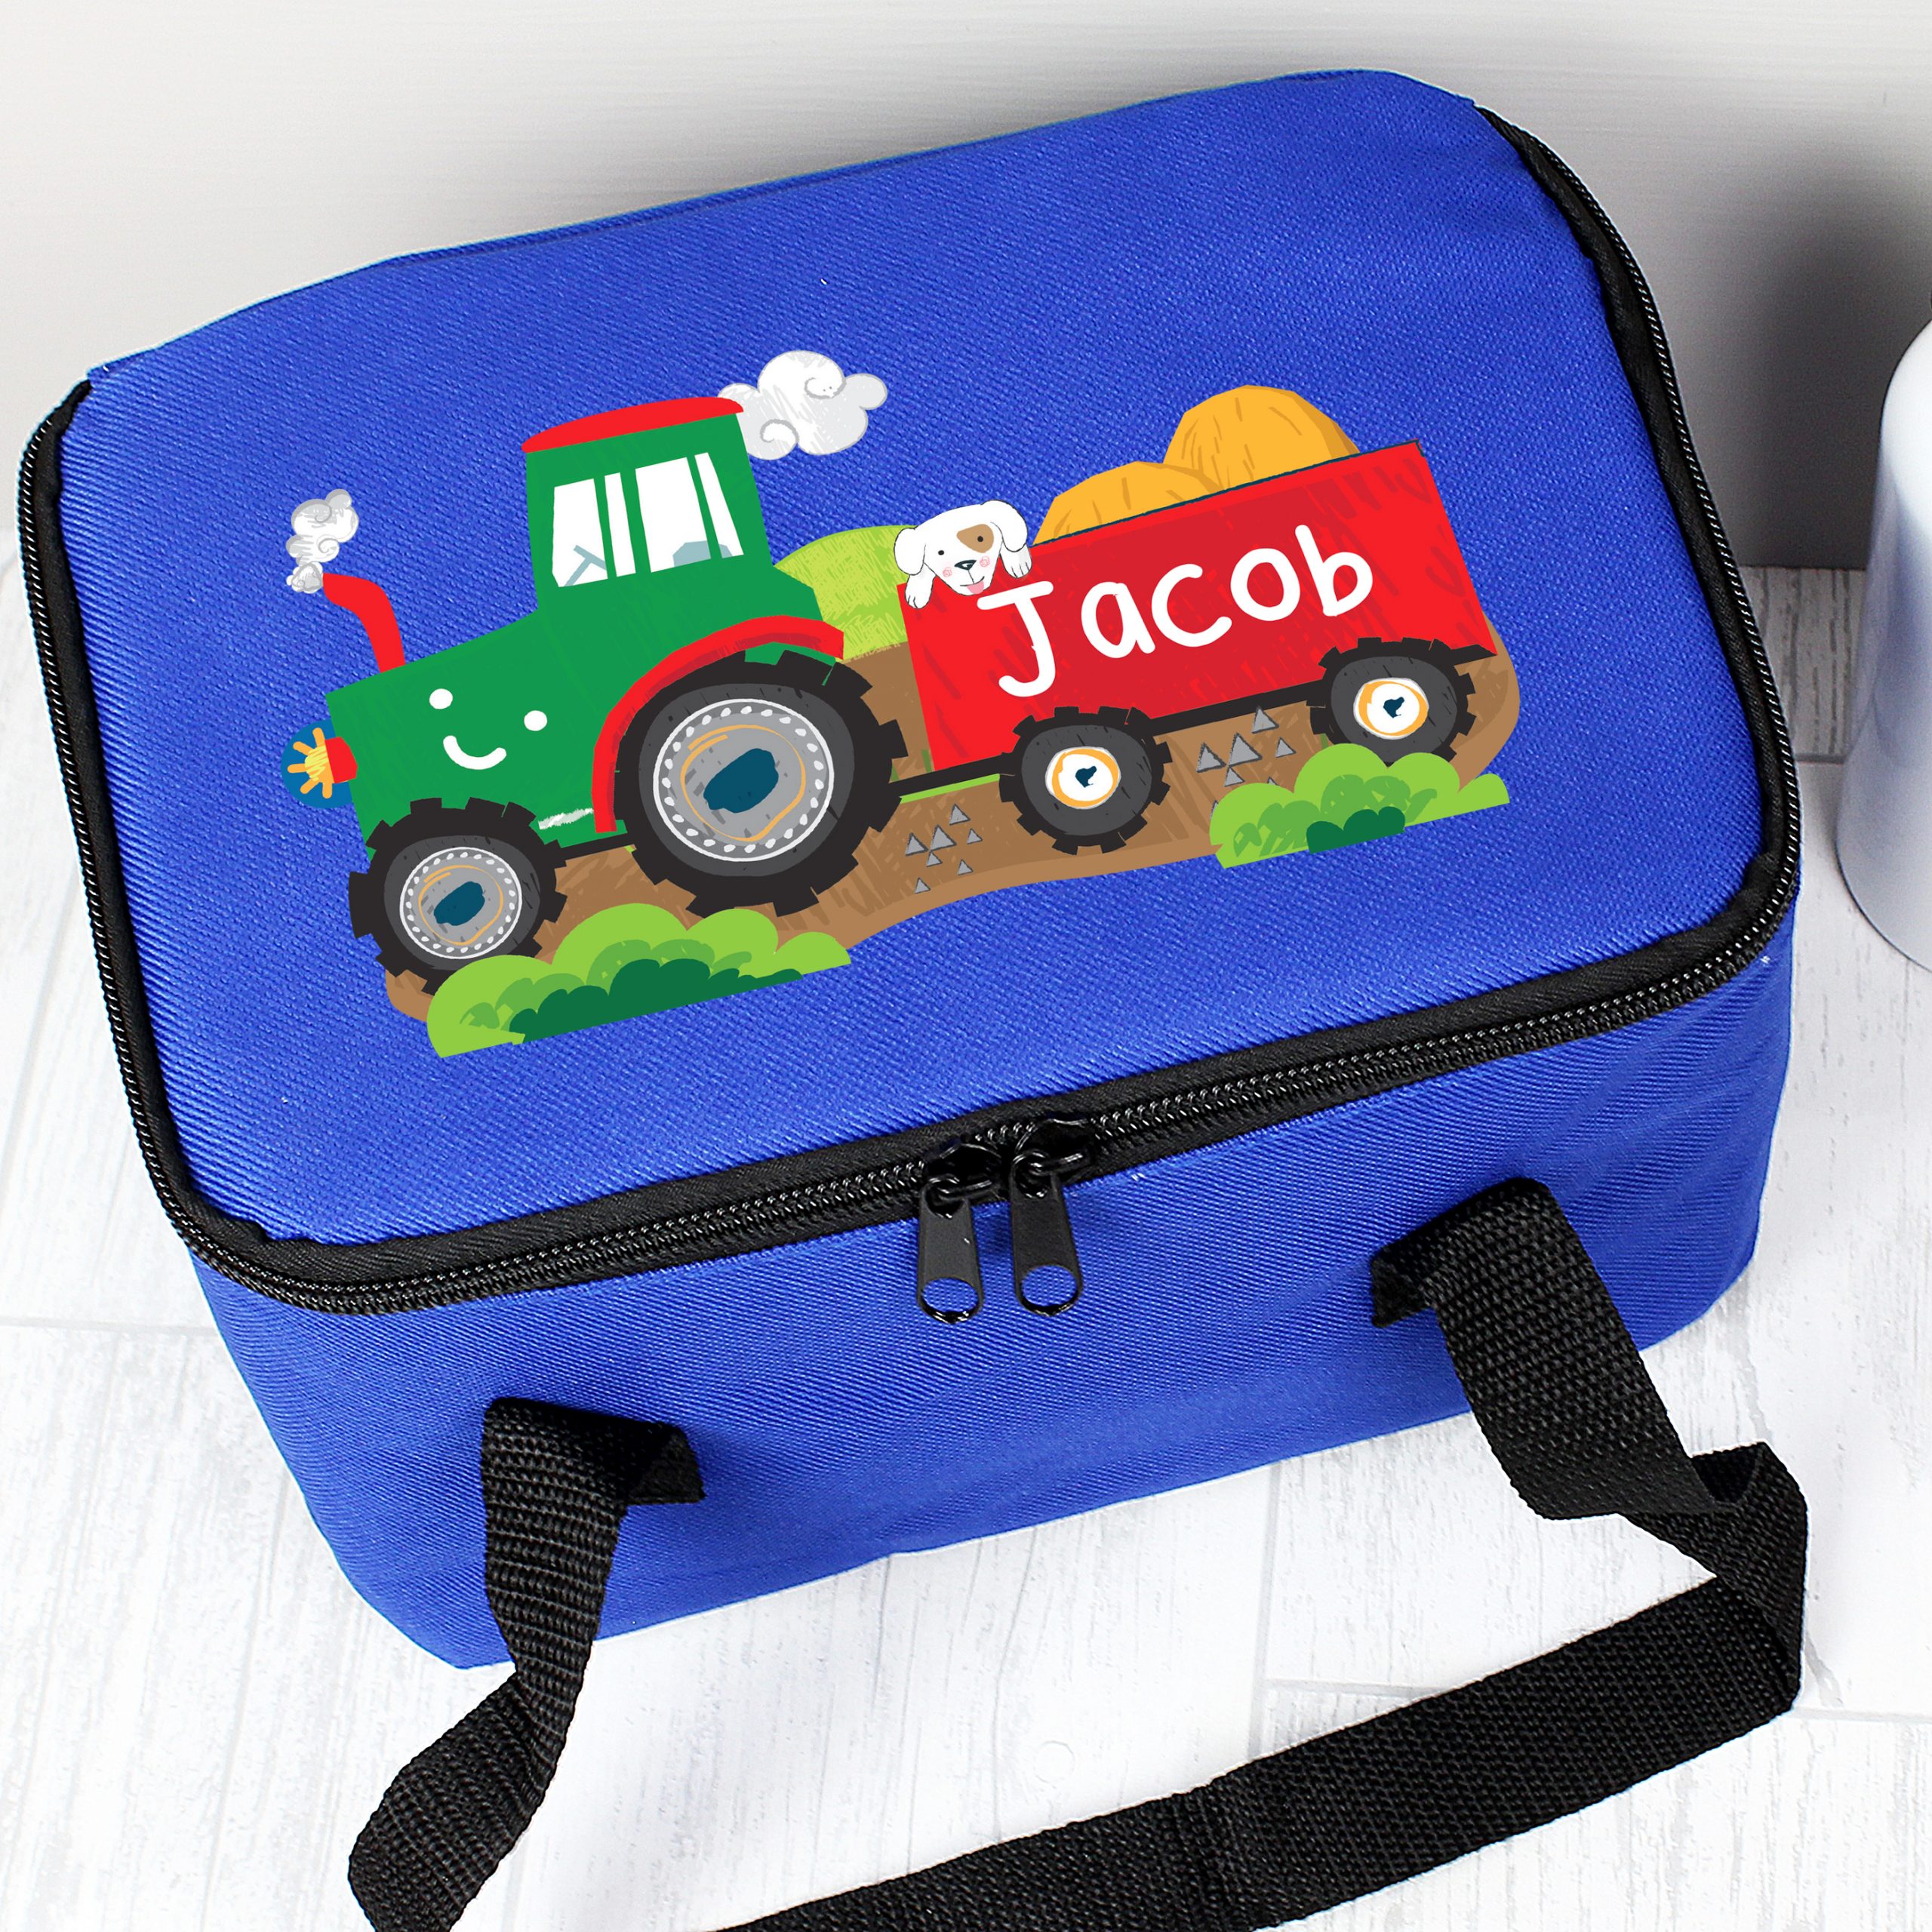 https://www.personalisedkidsgifts.co.uk/wp-content/uploads/2019/07/Personalised-Tractor-Lunch-Bag-1-scaled.jpg